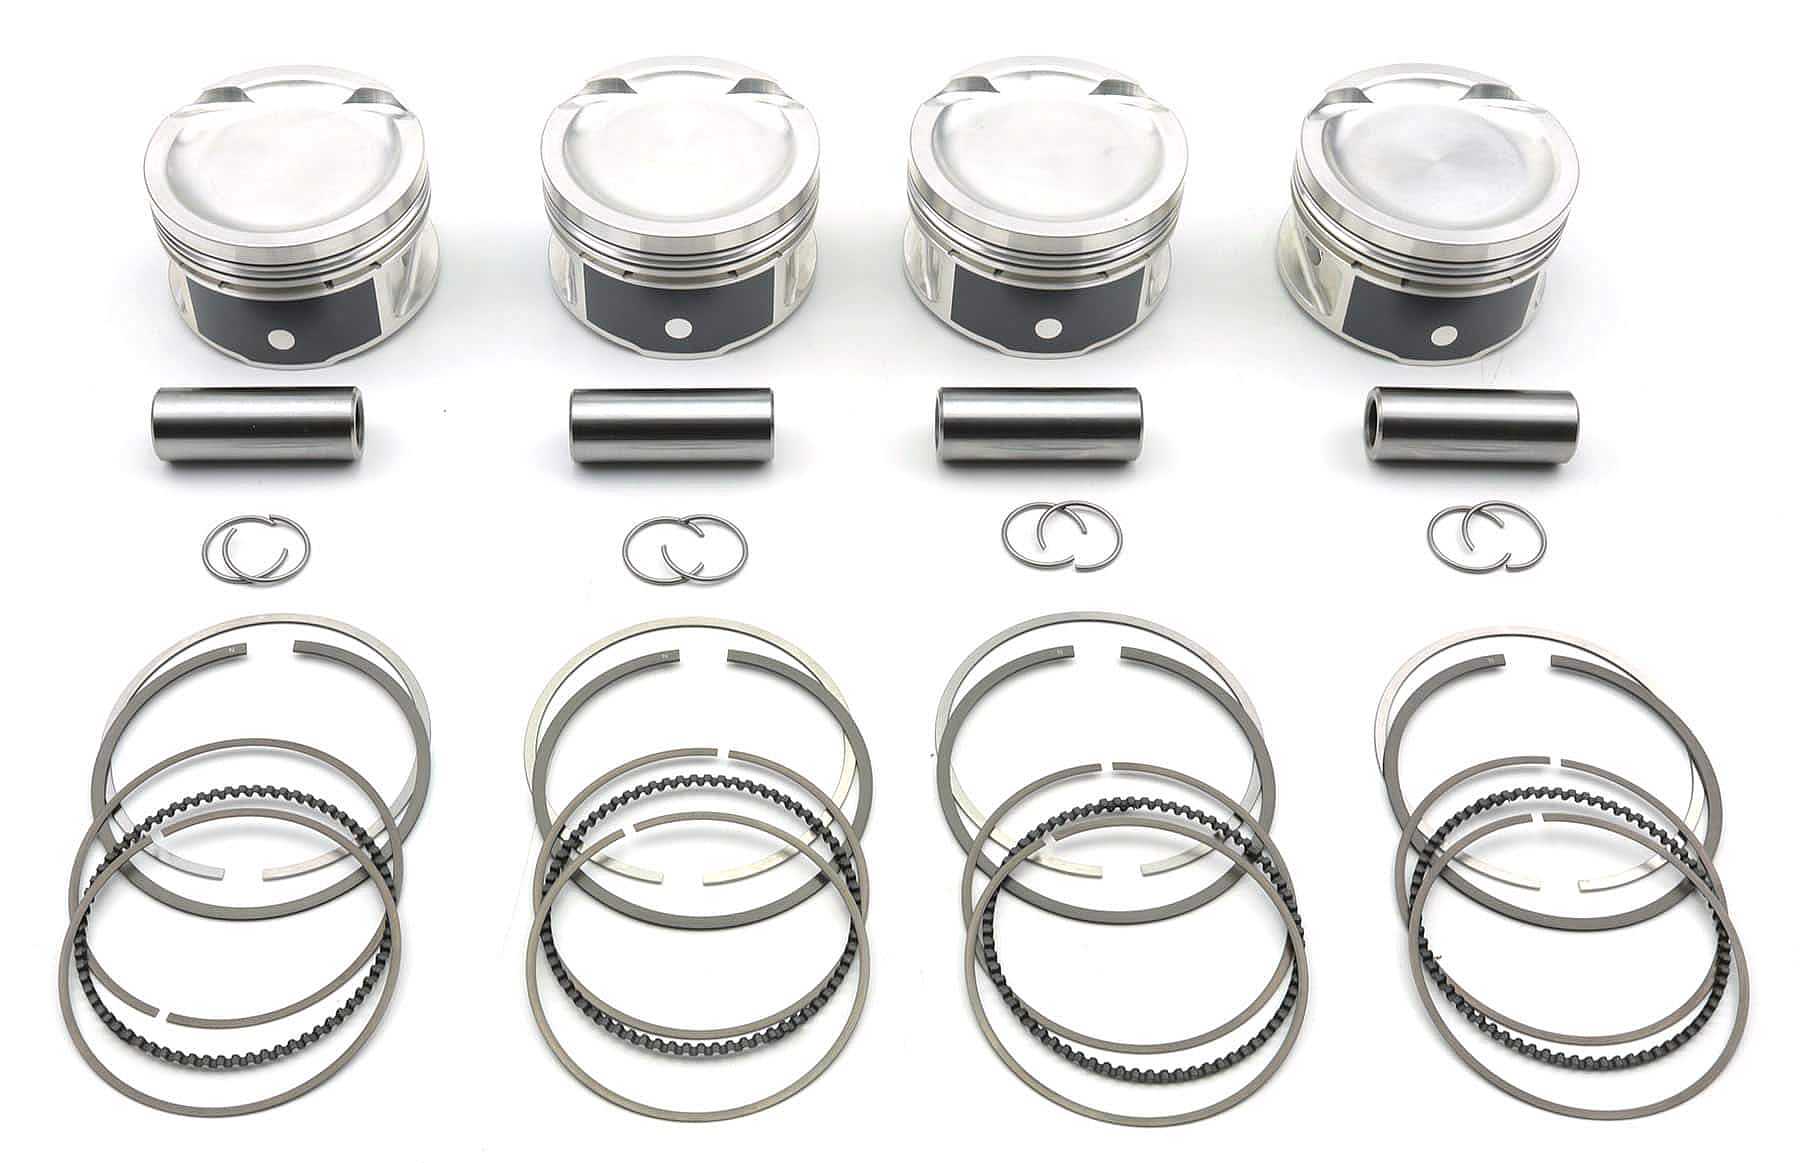 2.0L TSI with Chain Driven High Performance Pistons-Kit JE